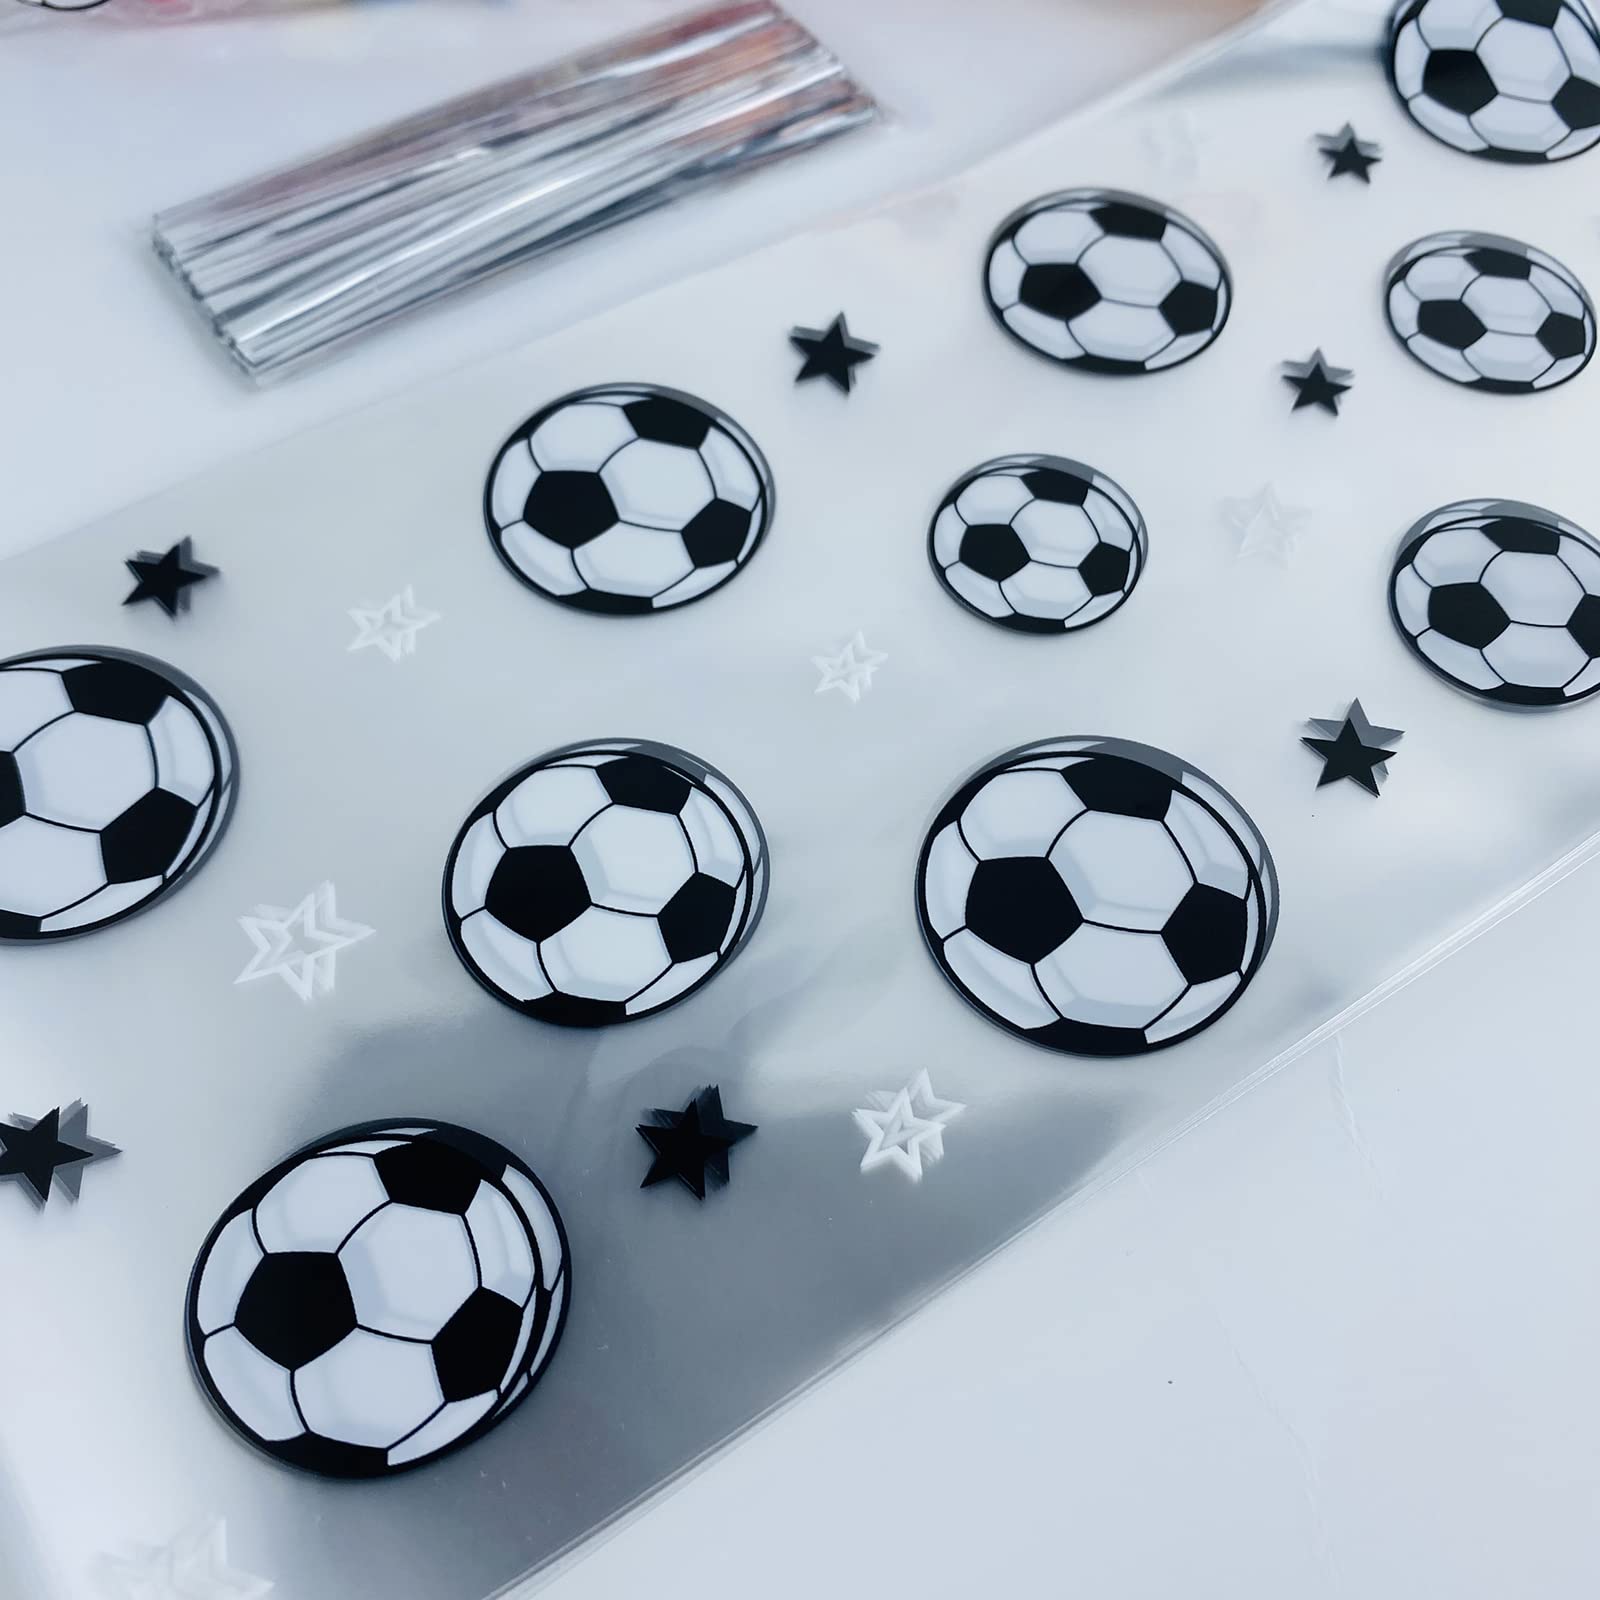 100 Pieces Clear Soccer Treat Bags Gift Bags, Soccer Party Favors Bags Soccer Cellophane Bag for Candy with 100 Pieces Silver Twist Ties